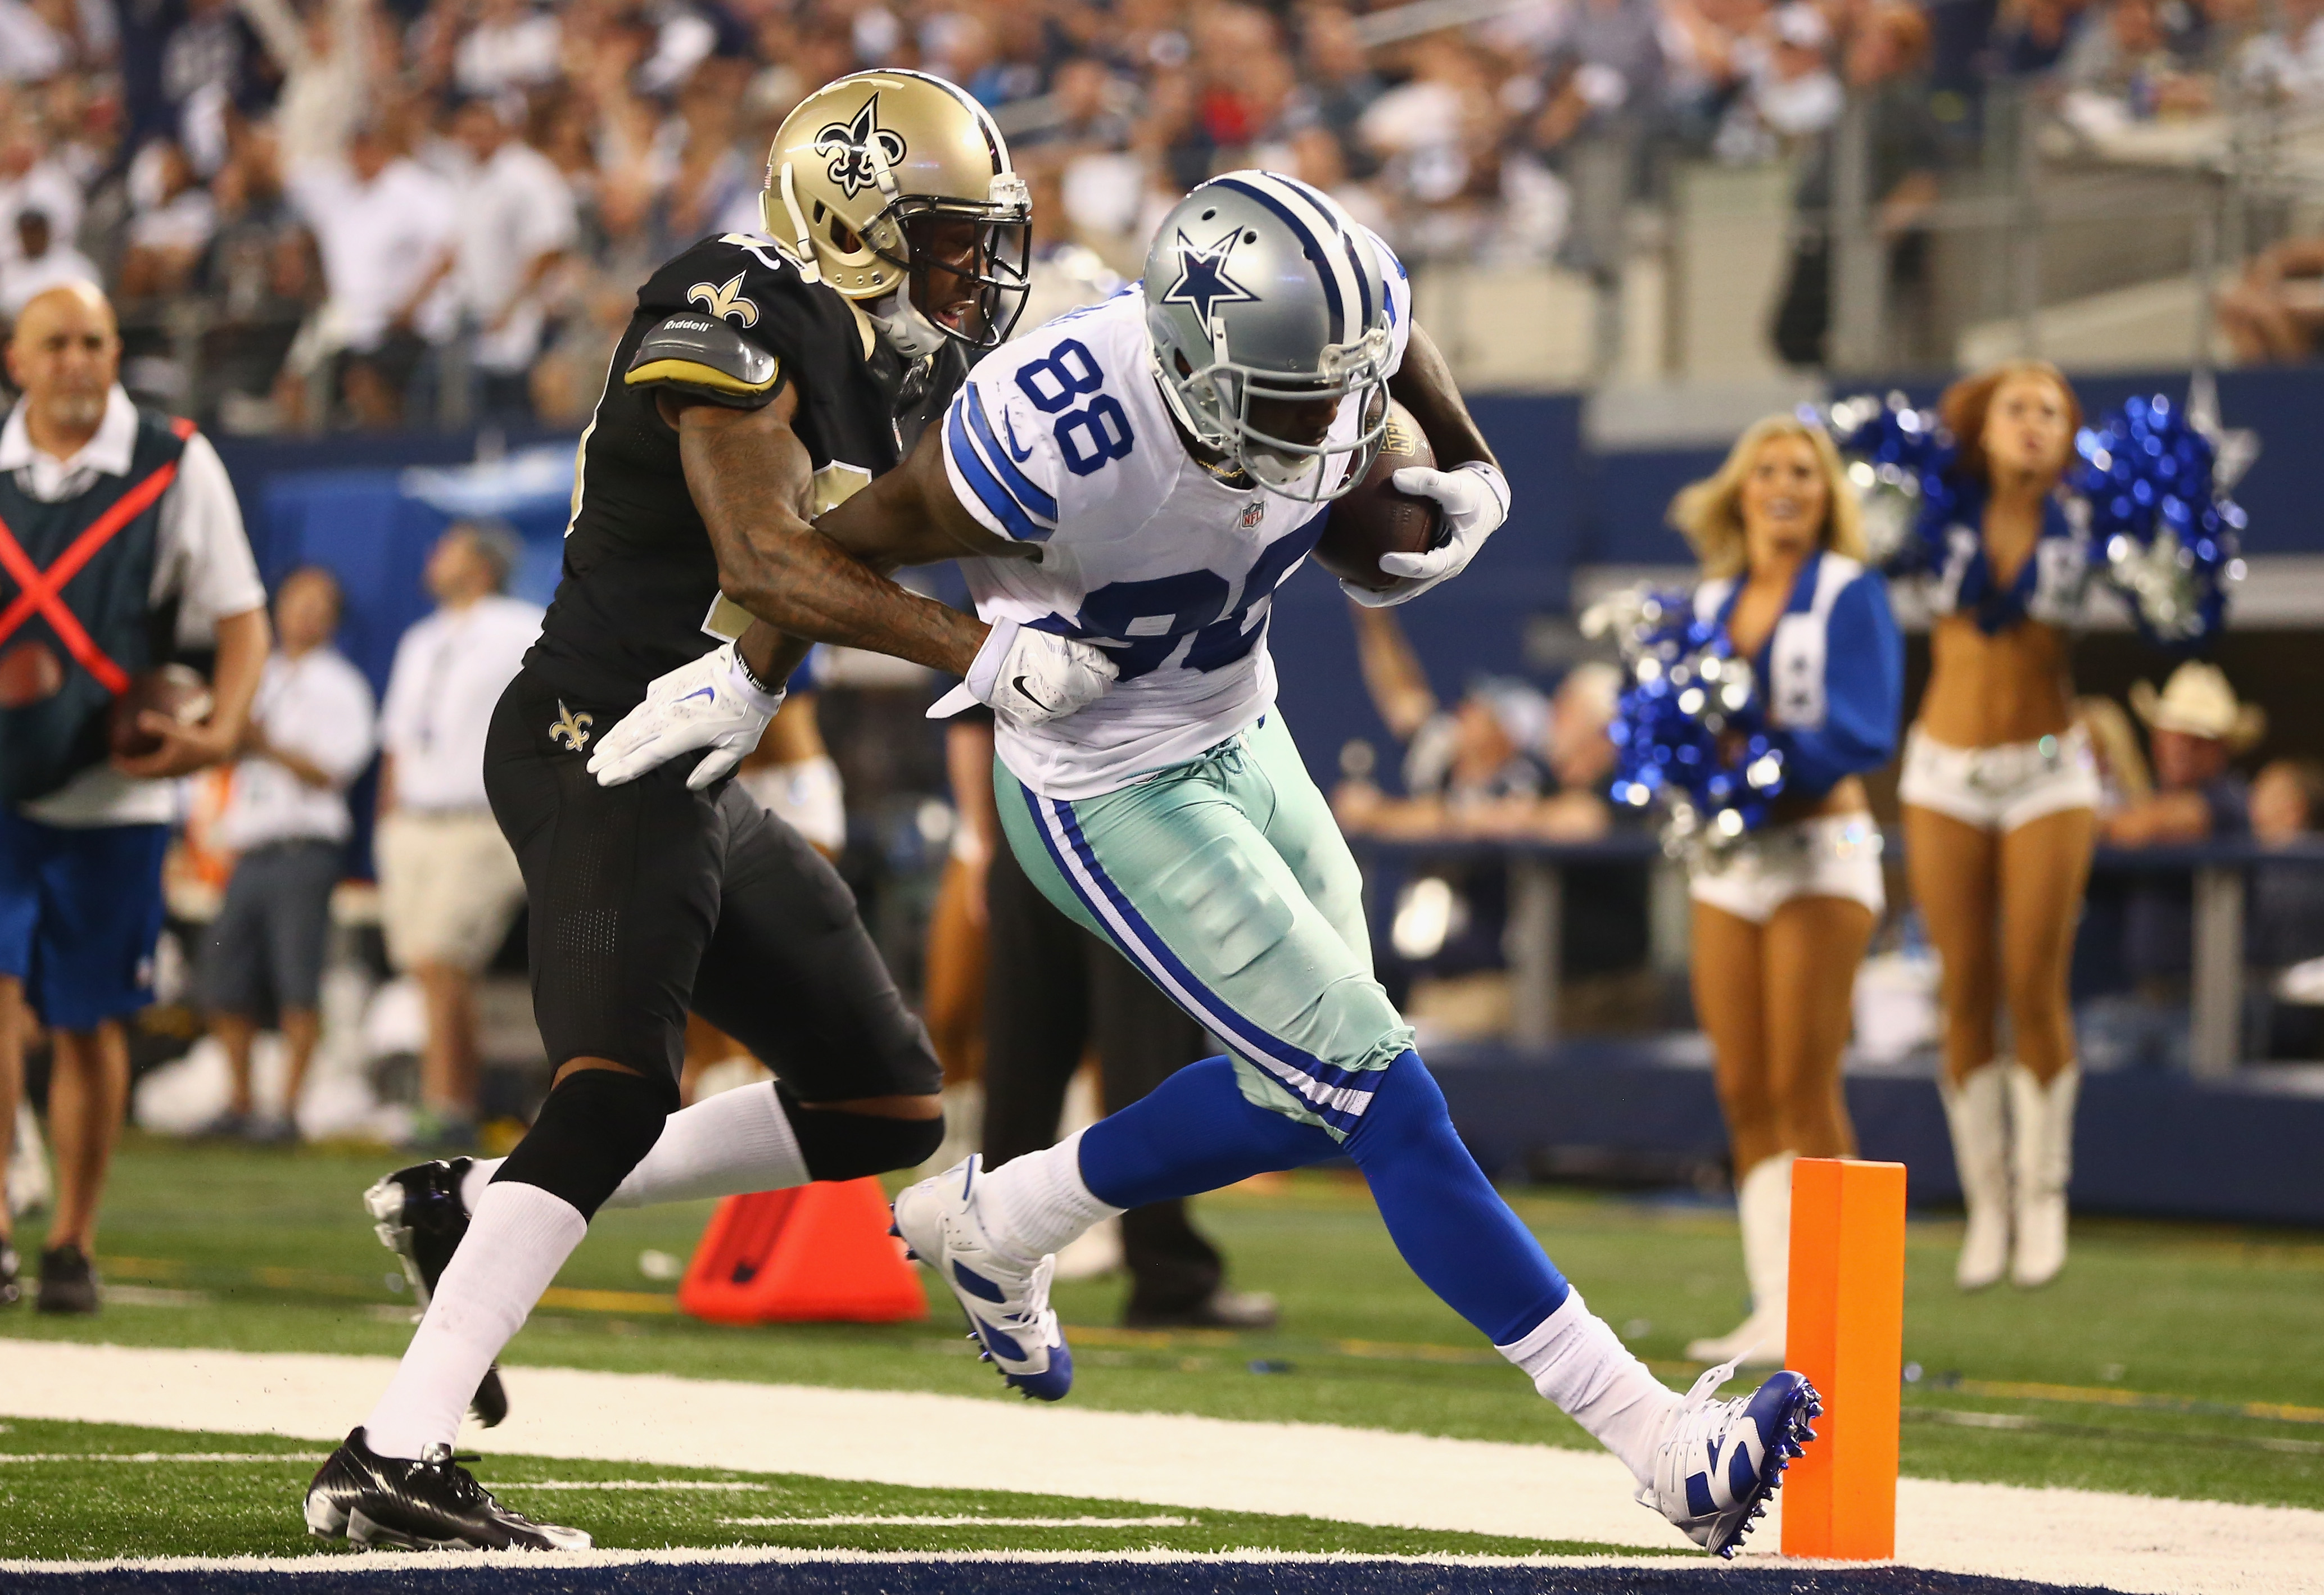 ARLINGTON, TX - New Orleans Saints cornerback Keenan Lewis (28) escorts Dallas Cowboys wide receiver Dez Bryant (88) into the end zone during a 2014 game at AT&amp;T Stadium.